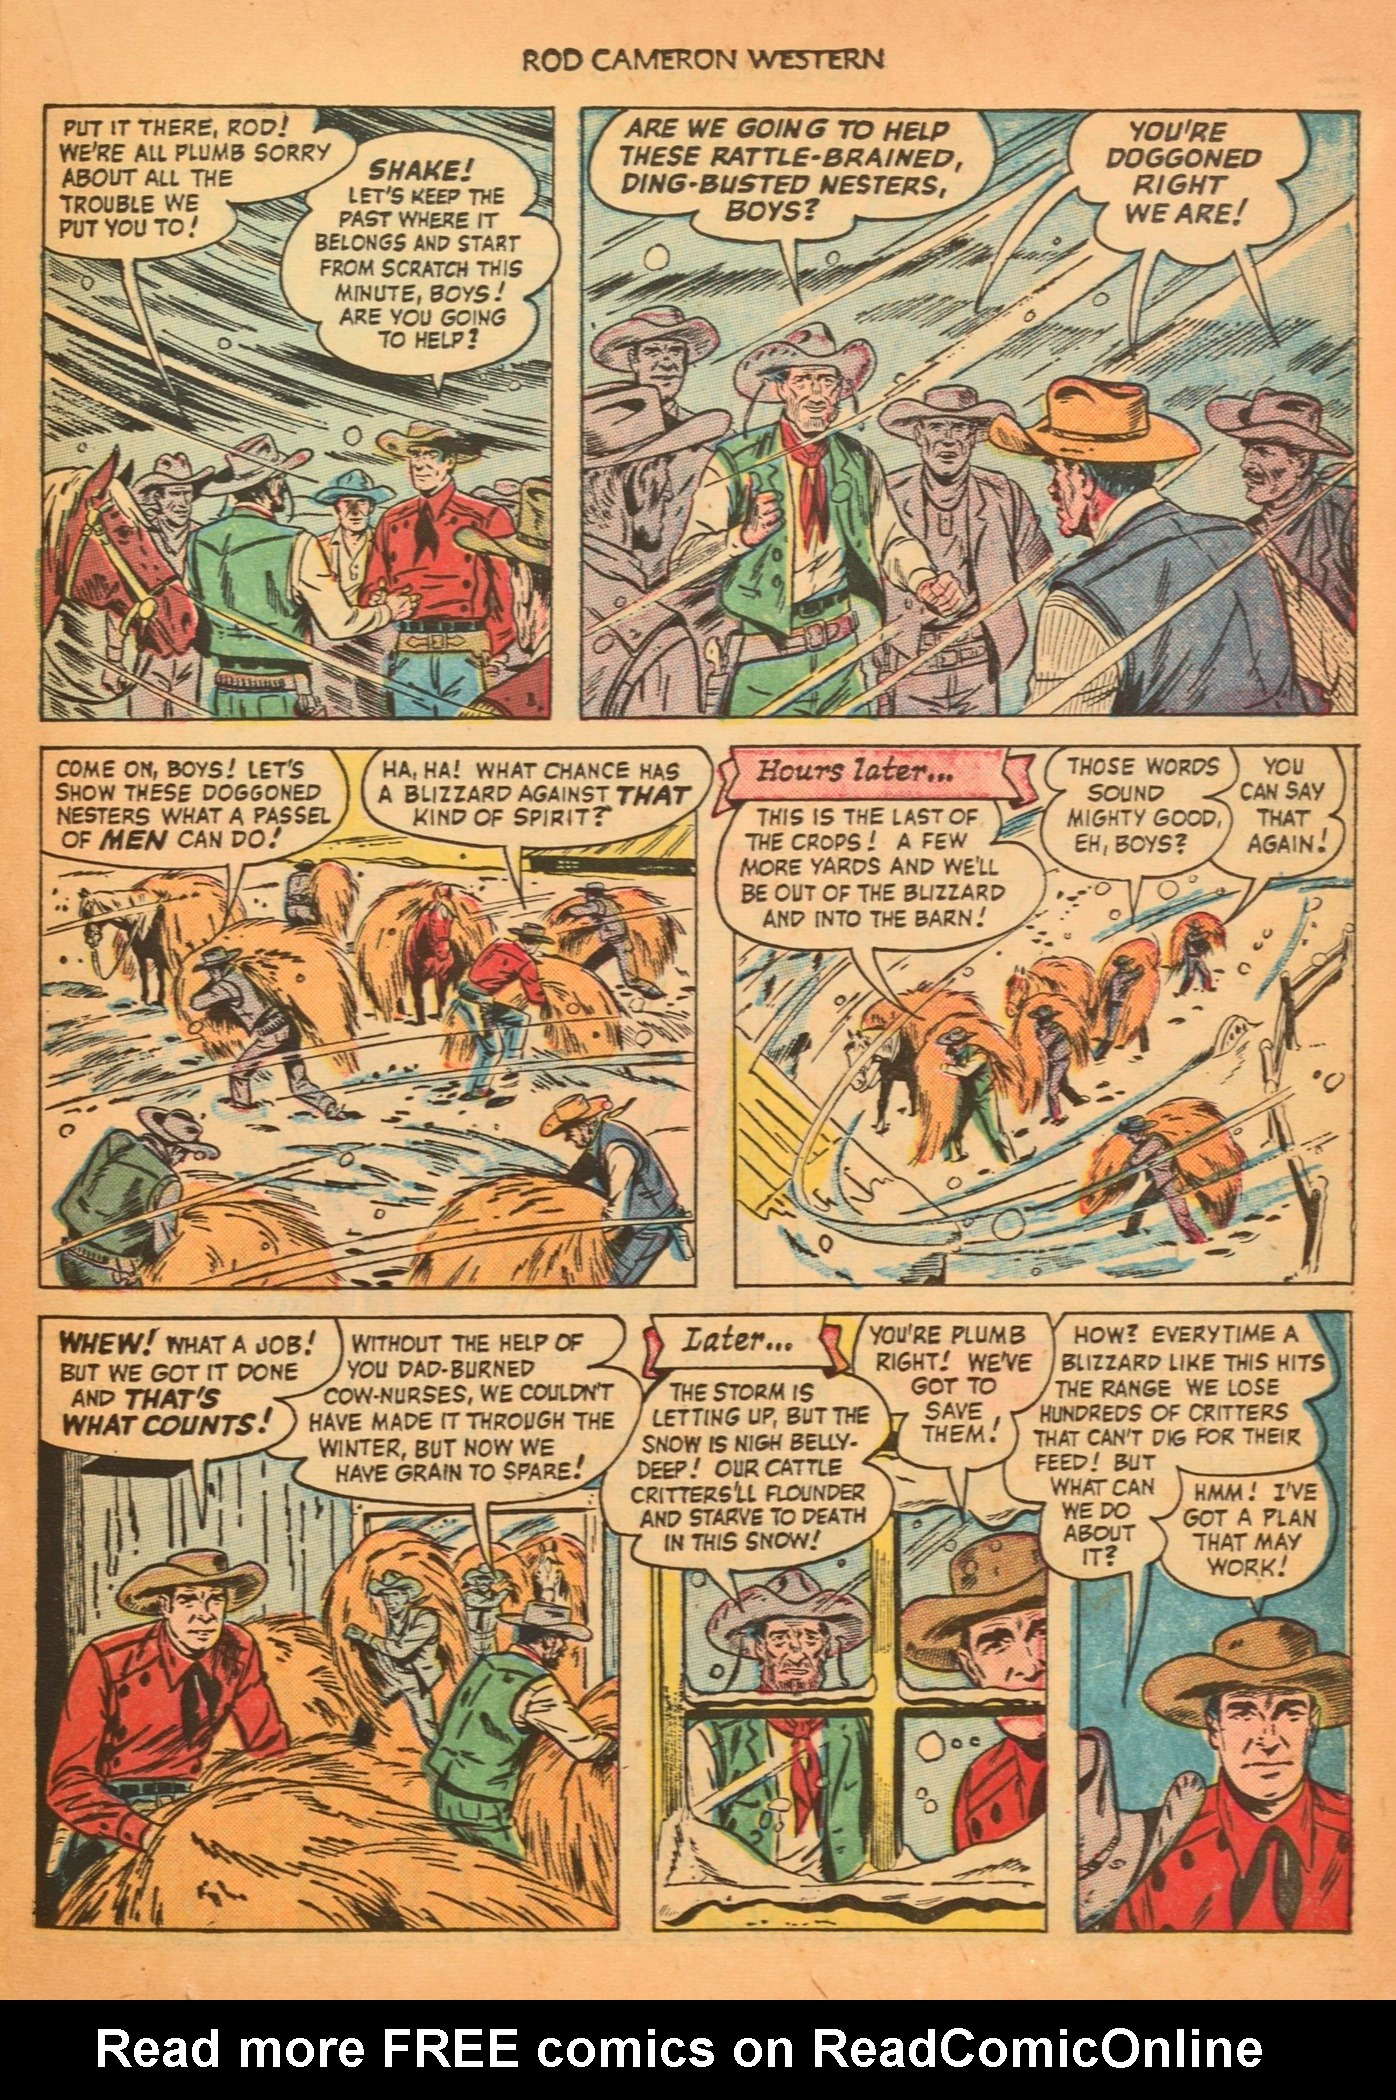 Read online Rod Cameron Western comic -  Issue #2 - 23